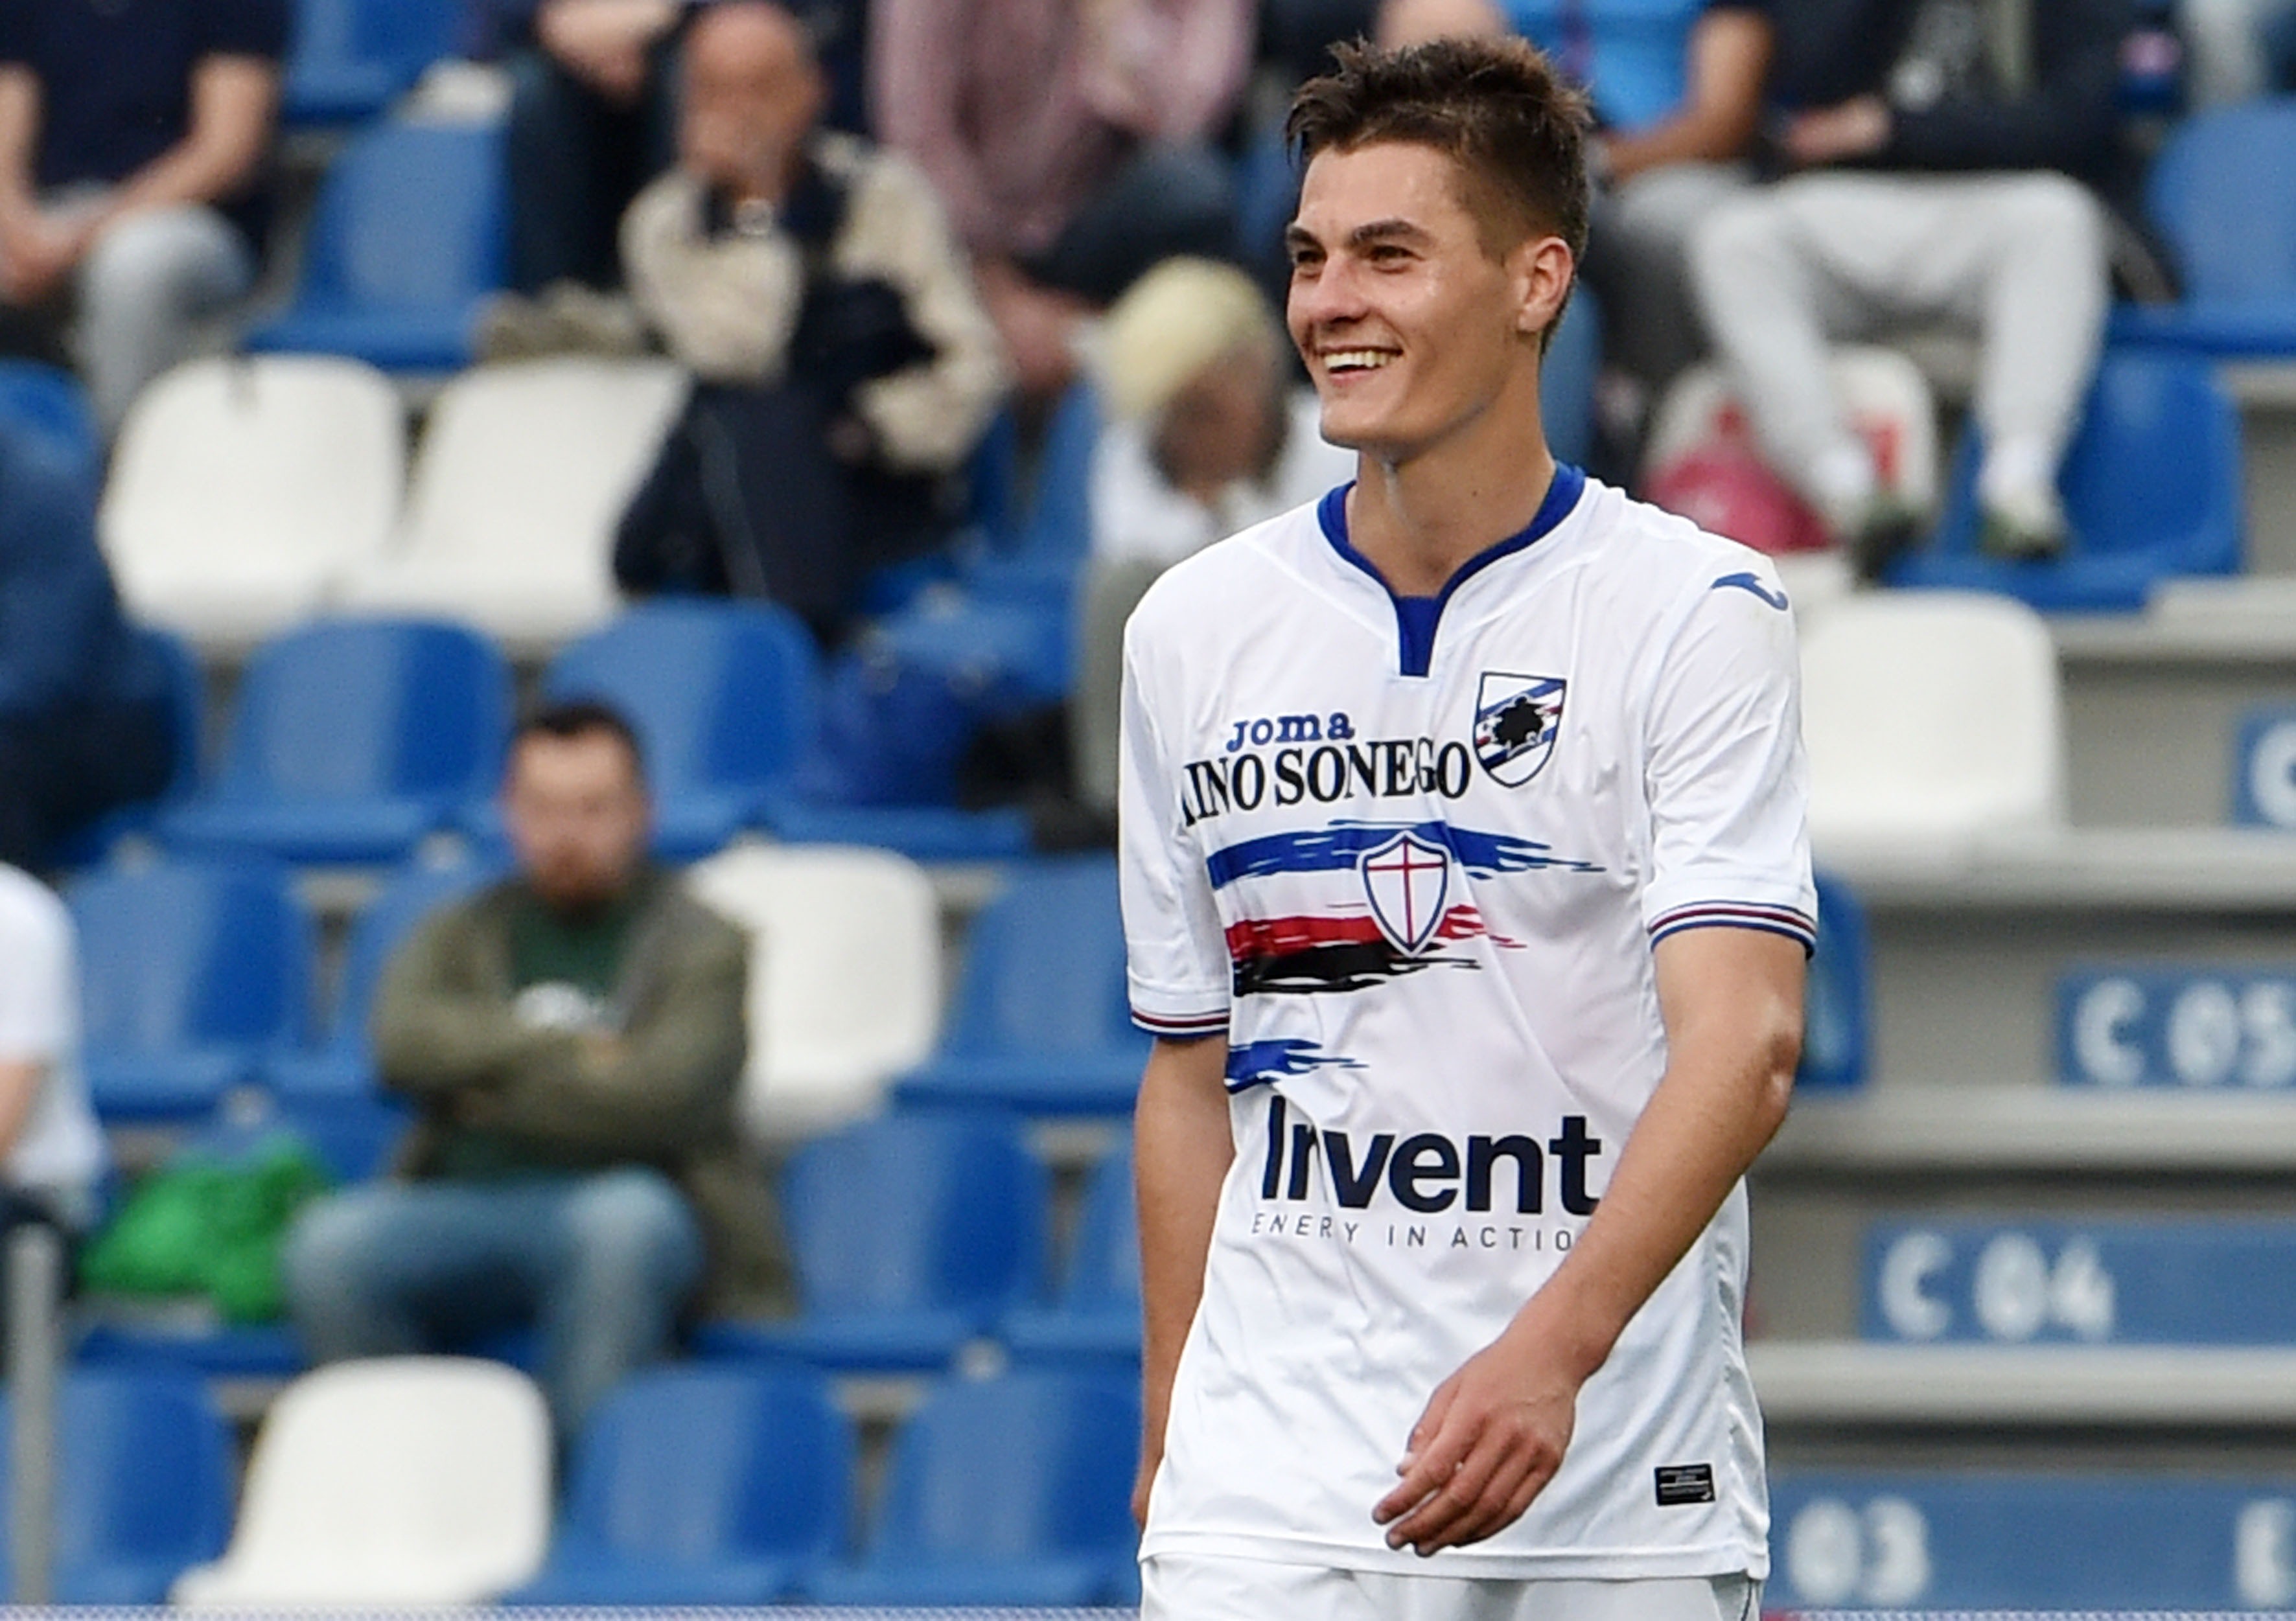 Sport: Atlético Madrid could move for Schick